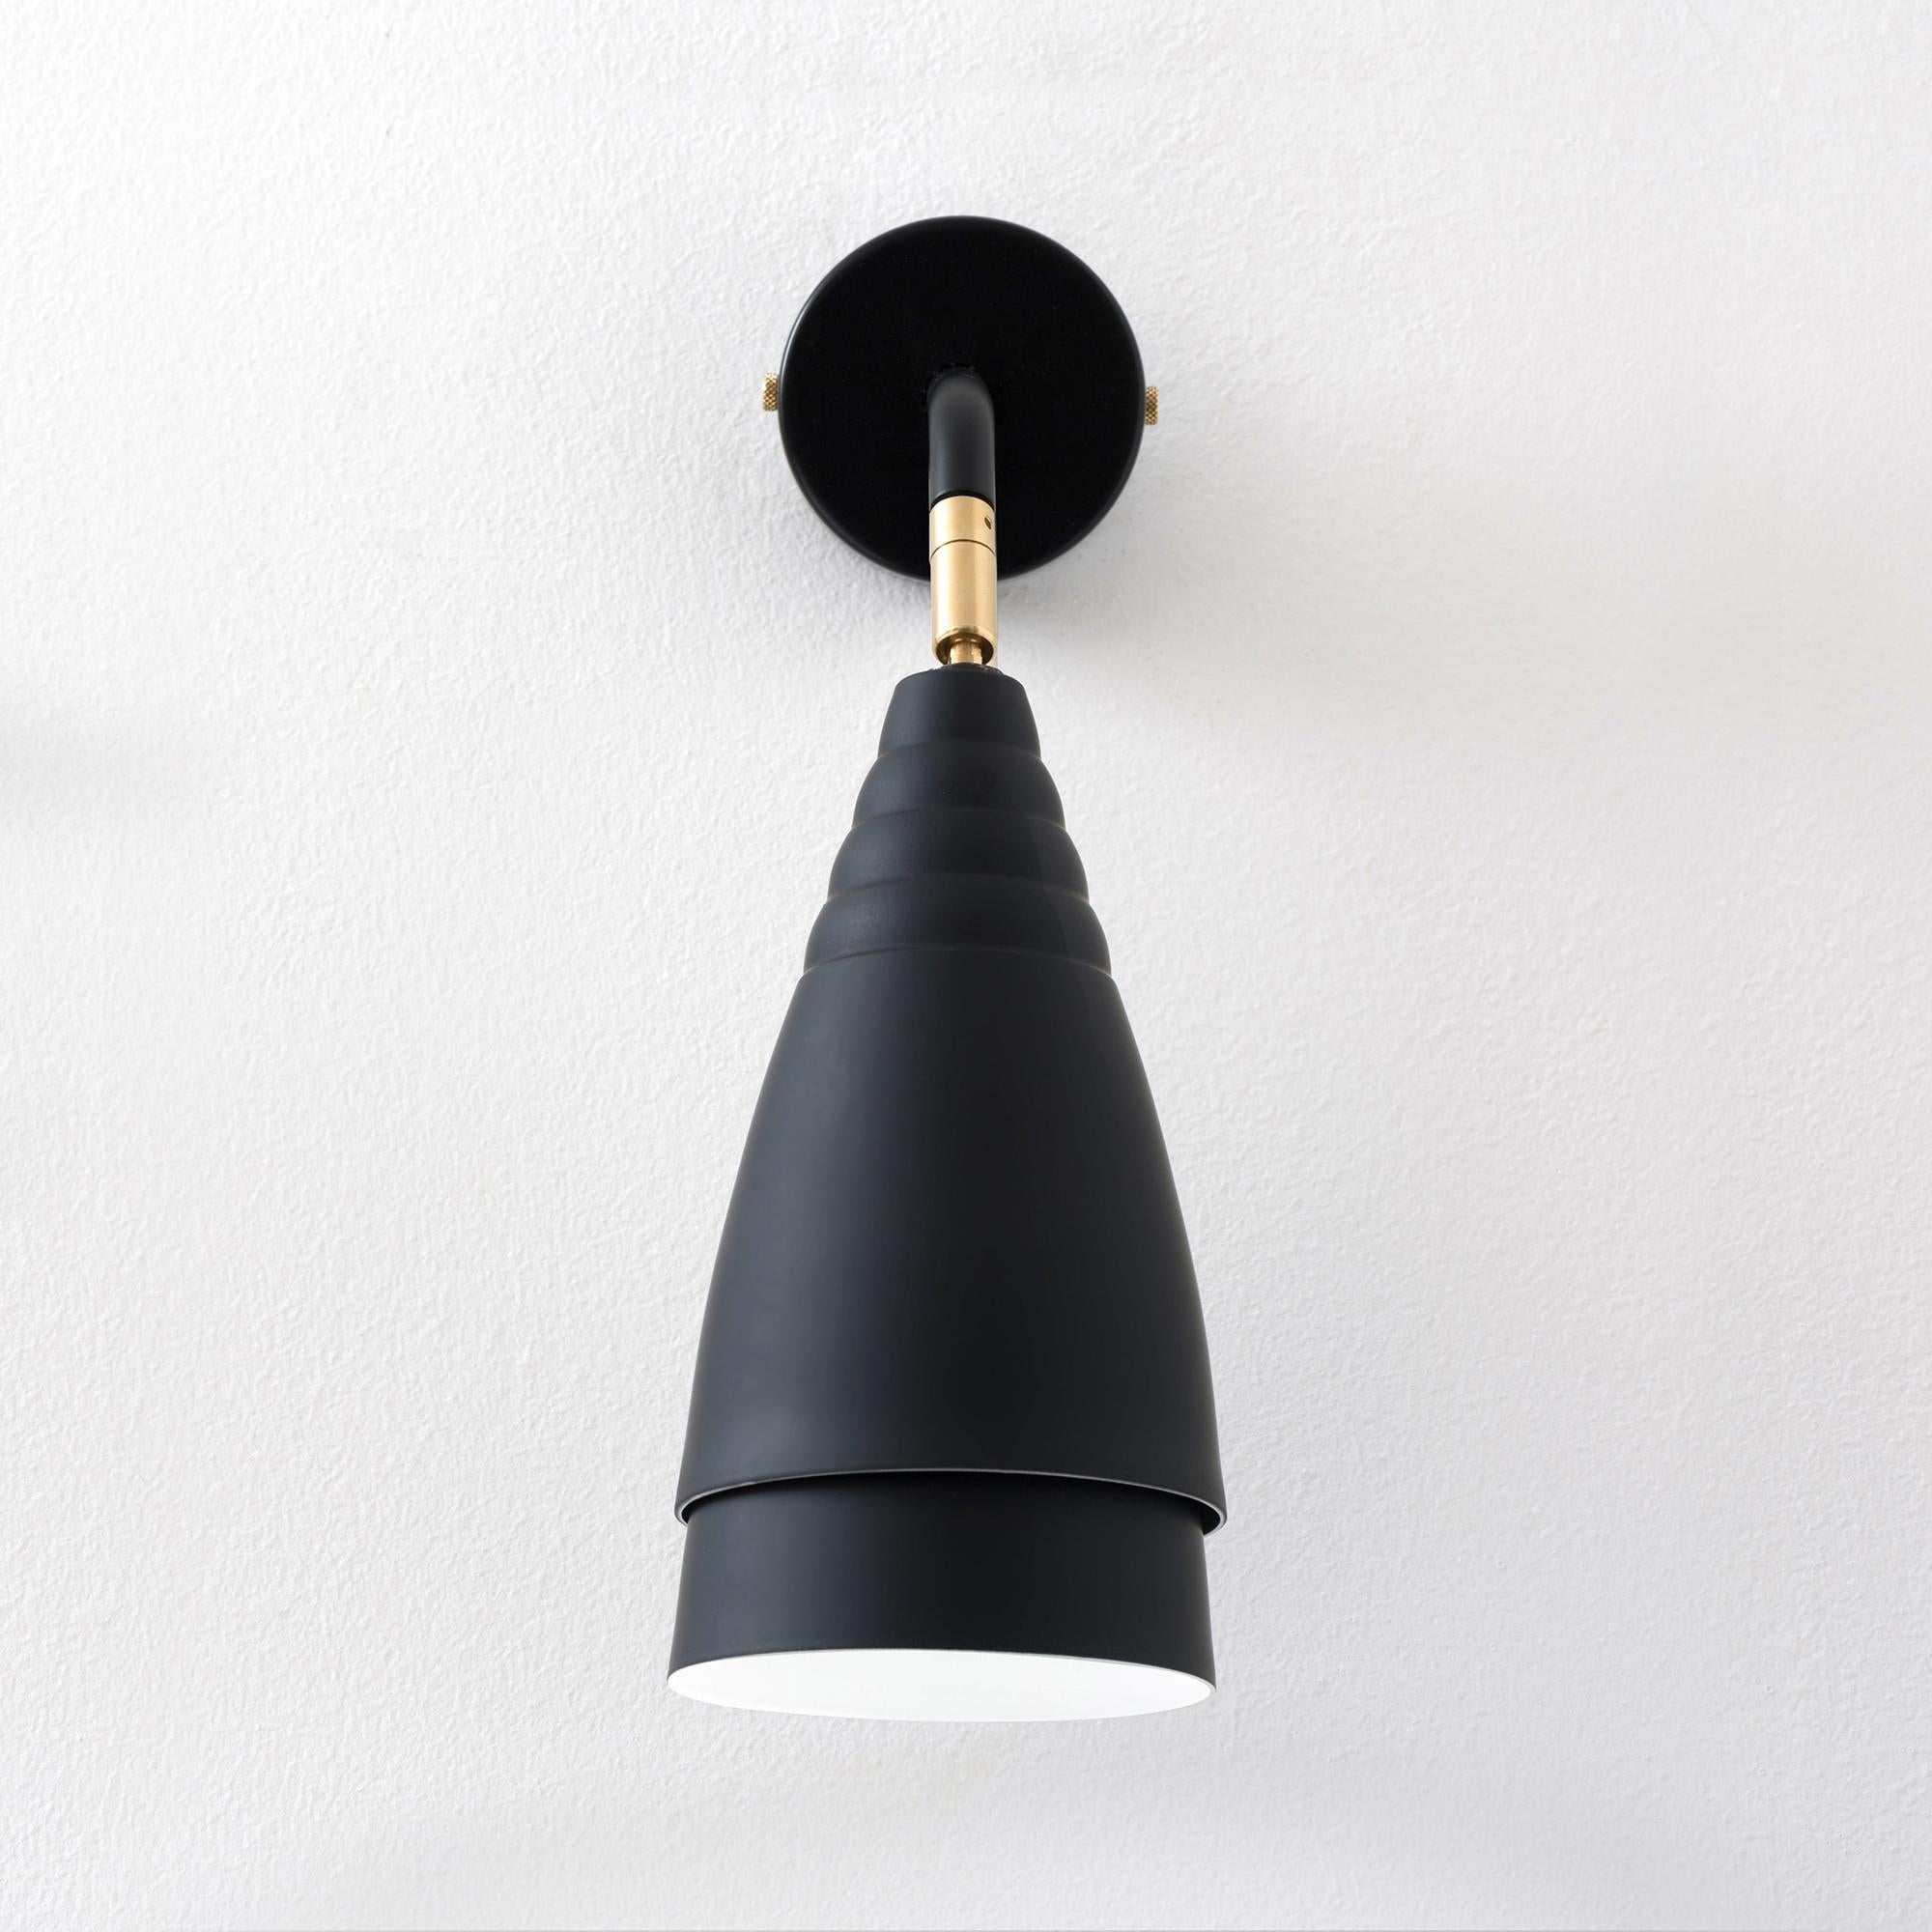 Industrial Wall Light with Italian Design in Soft Touch Matte Colors (Industriell) im Angebot